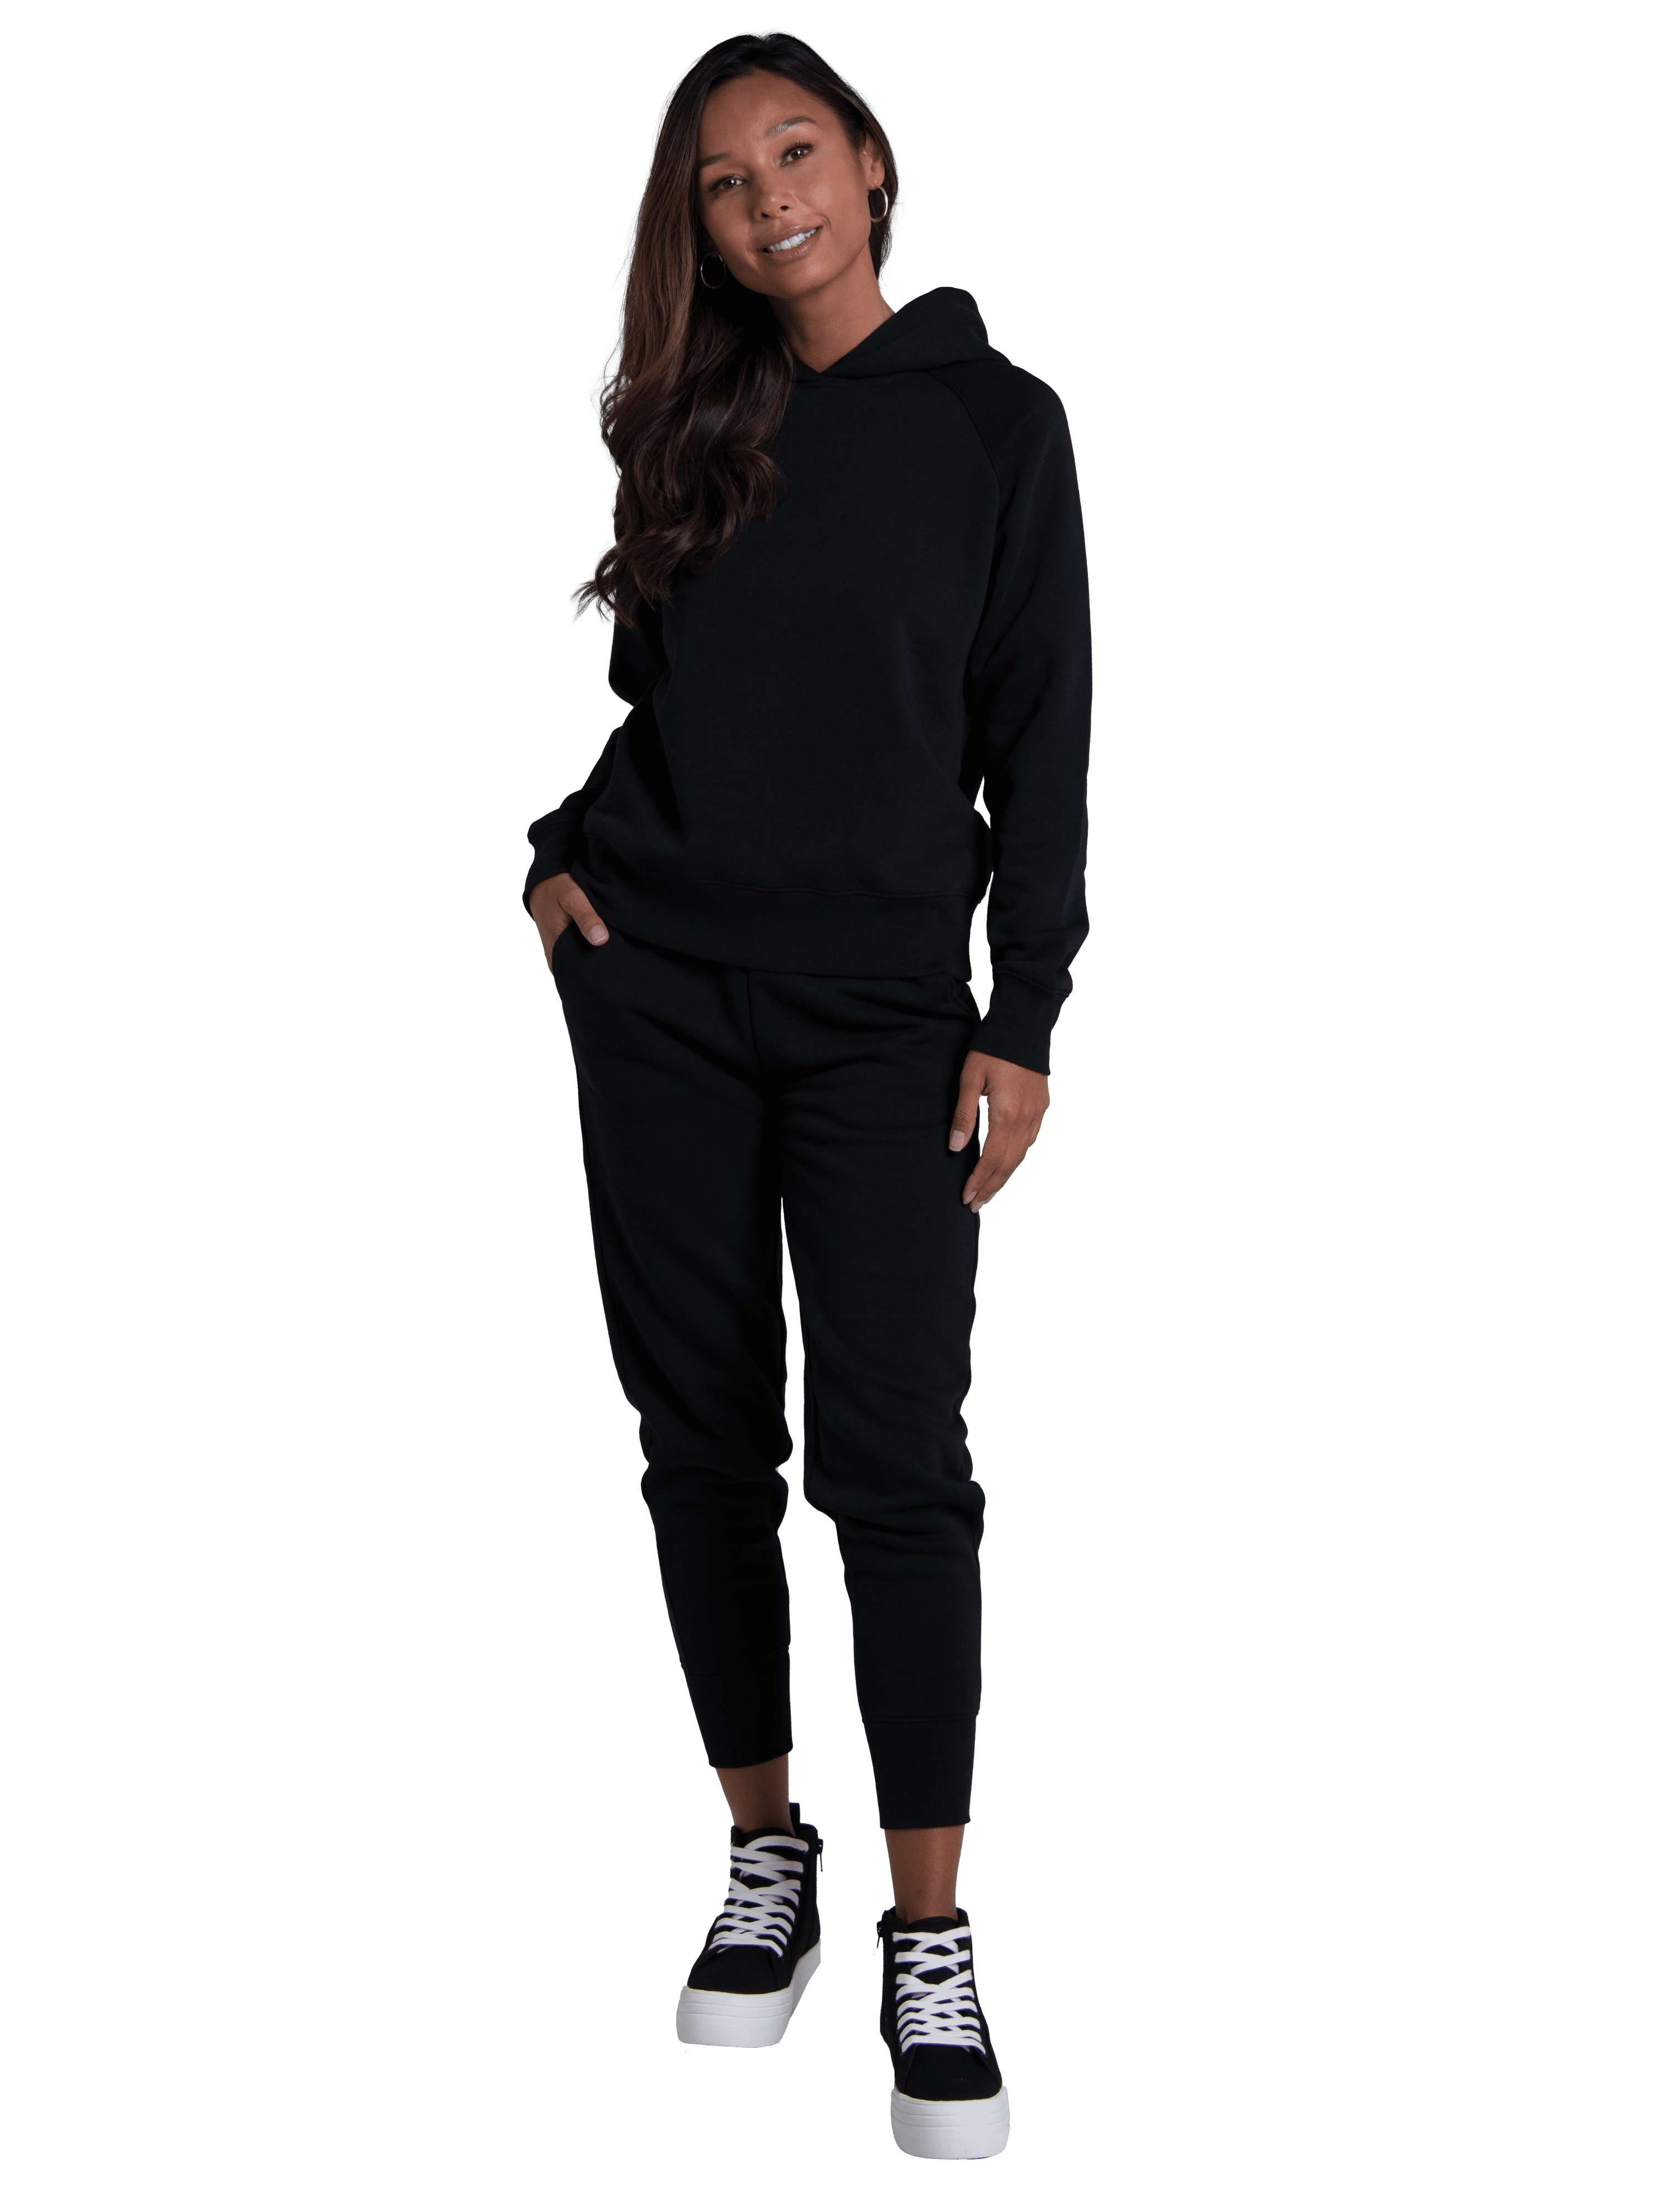 Fruit of the Loom Women's Crafted Comfort Fleece Jogger Pants, Sizes S ...